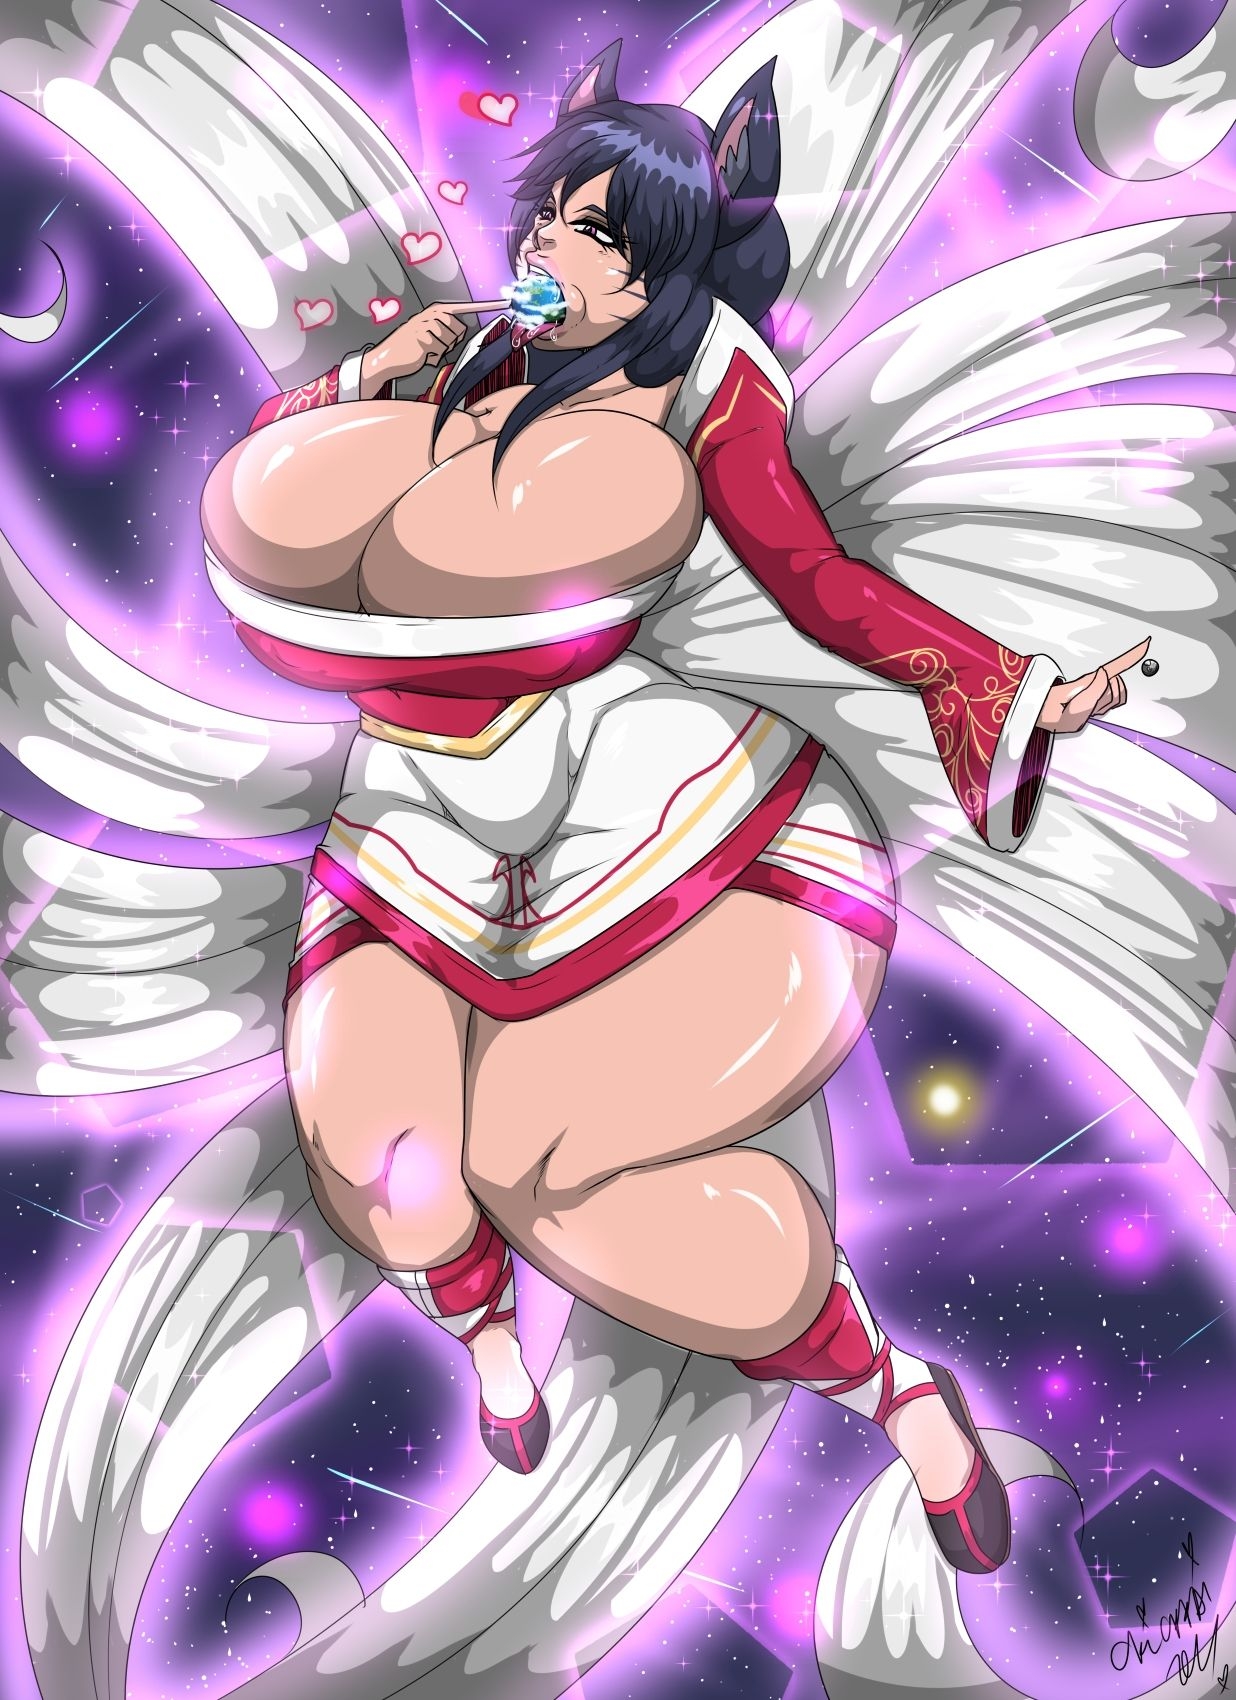 [OkiOppai] Ahri's Hungry Adventure (League of Legends) [Ongoing] 1